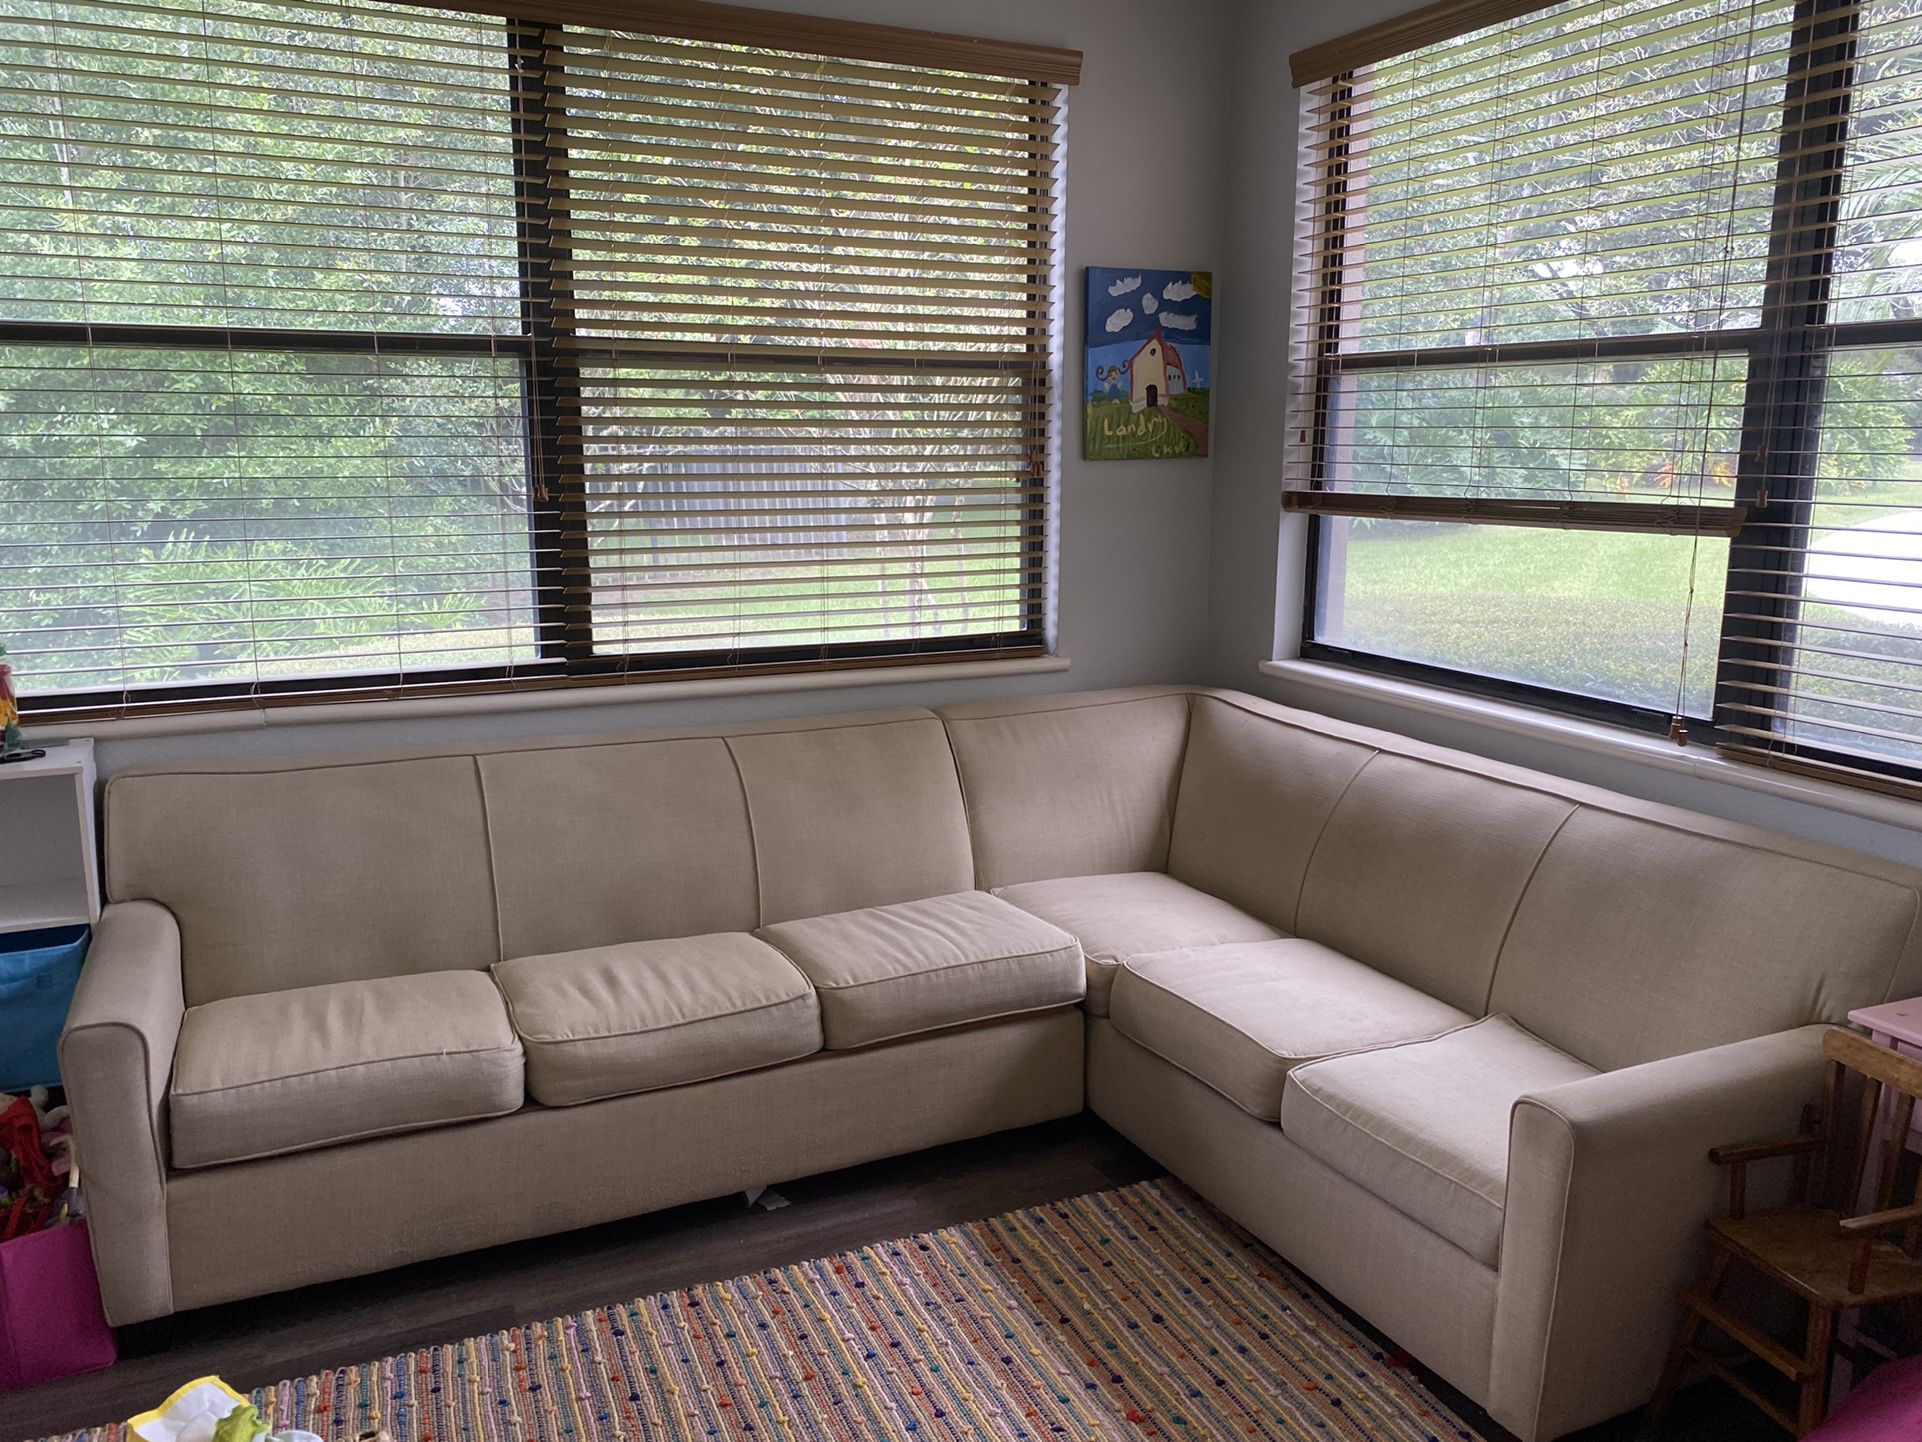 Sectional Sofa W/pullout queen bed 